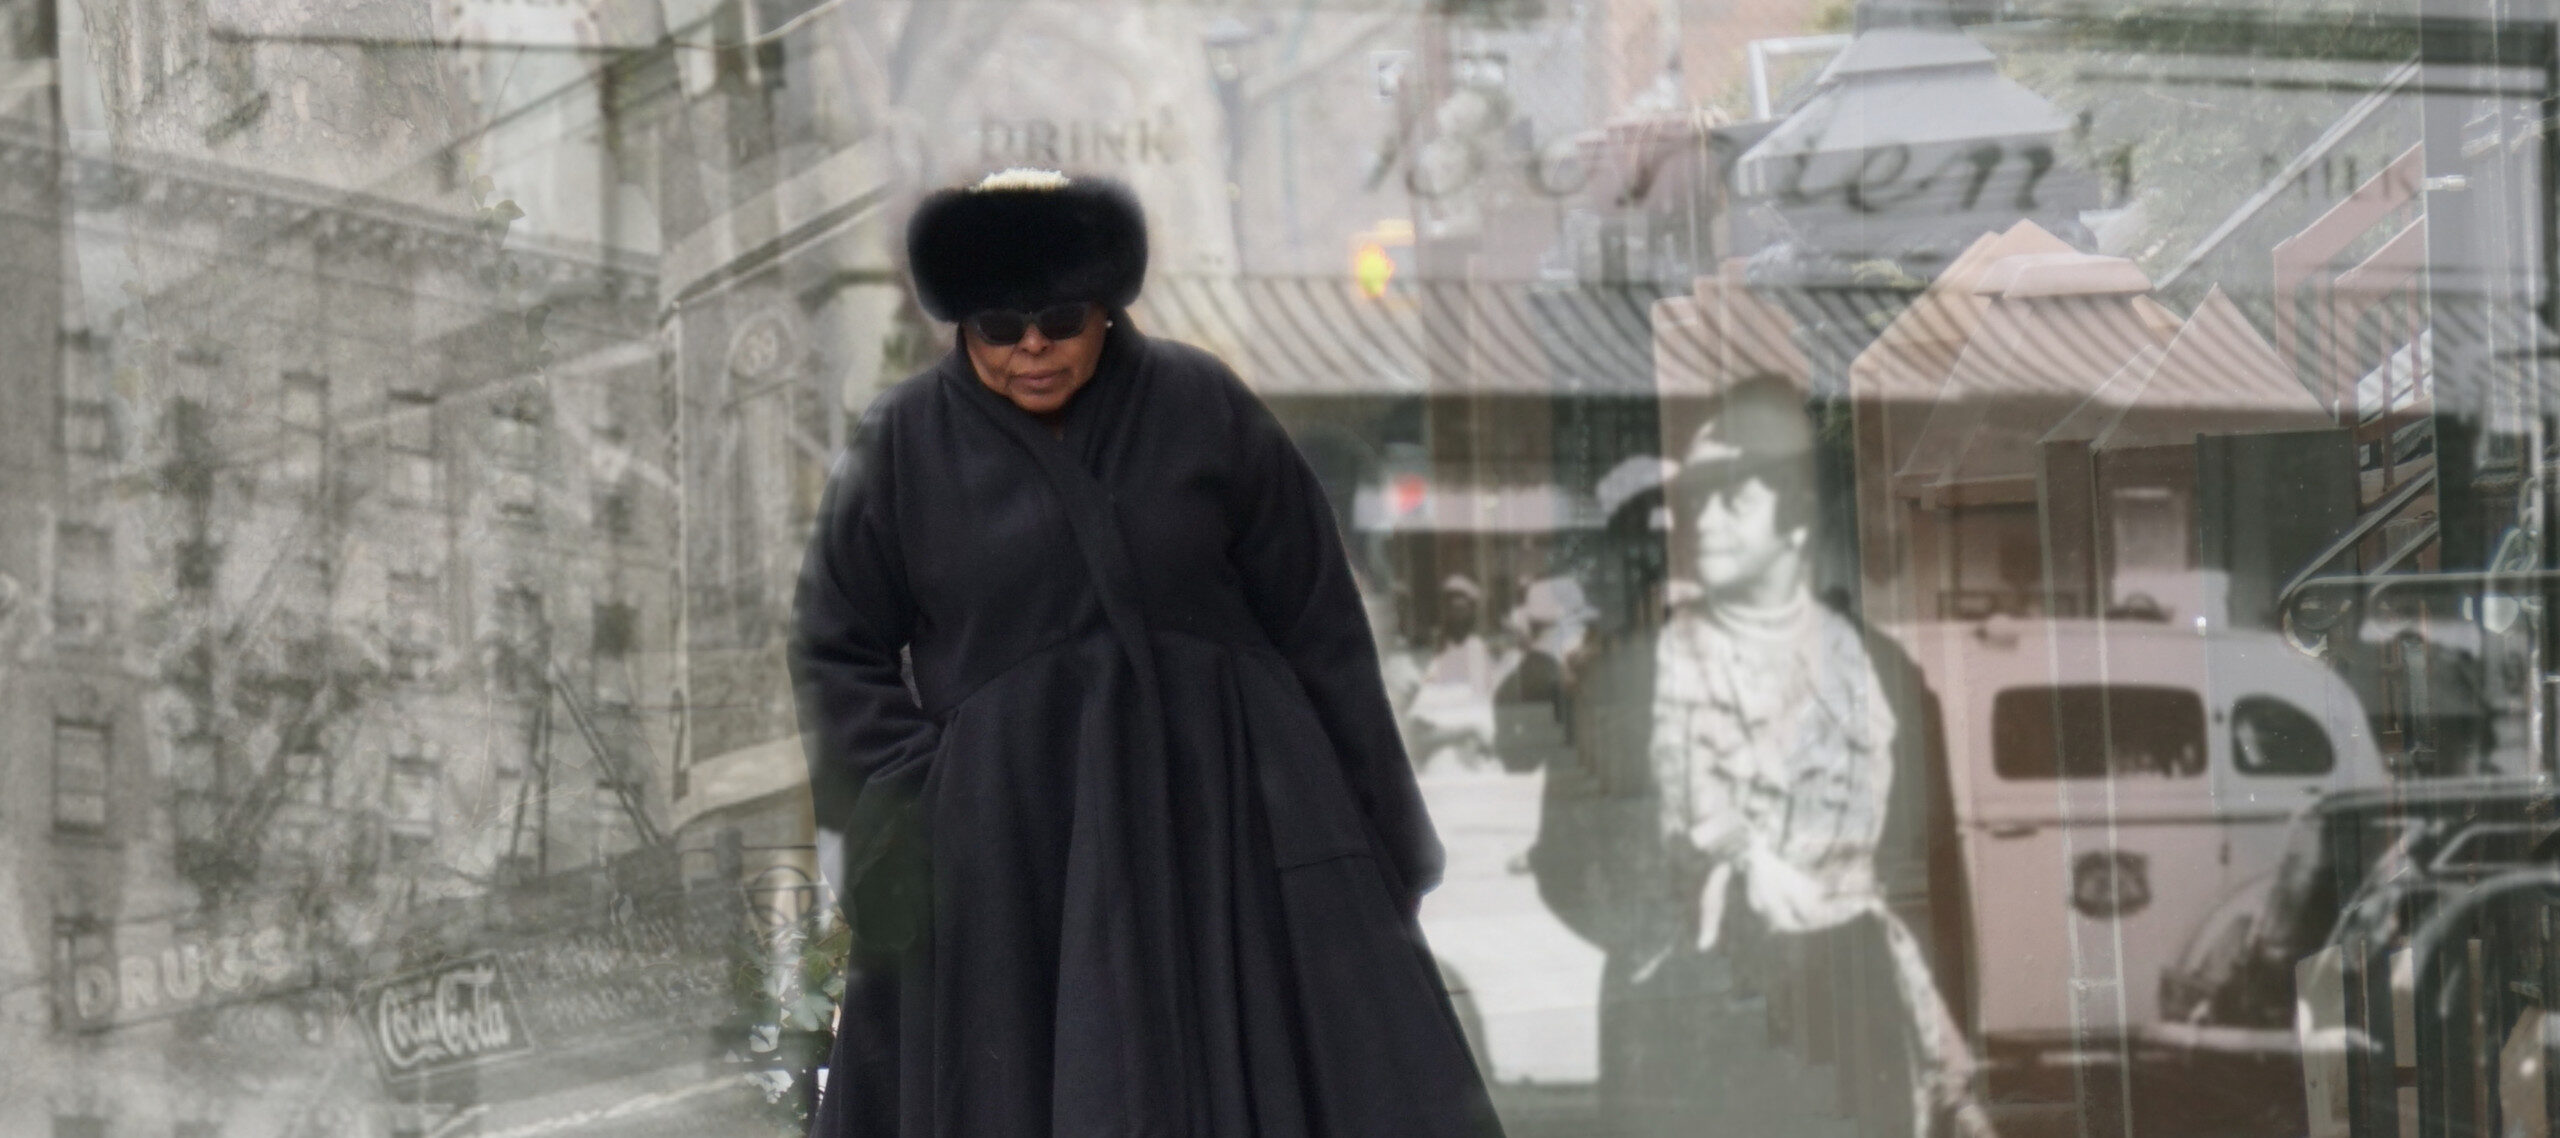 A medium-dark skinned adult woman wearing all black—a fur hat, sunglasses, boots, and a long, voluminous coat—walks on a sidewalk toward the viewer. Black and white images of people and buildings in Harlem from the early 20th century are layered over the woman.